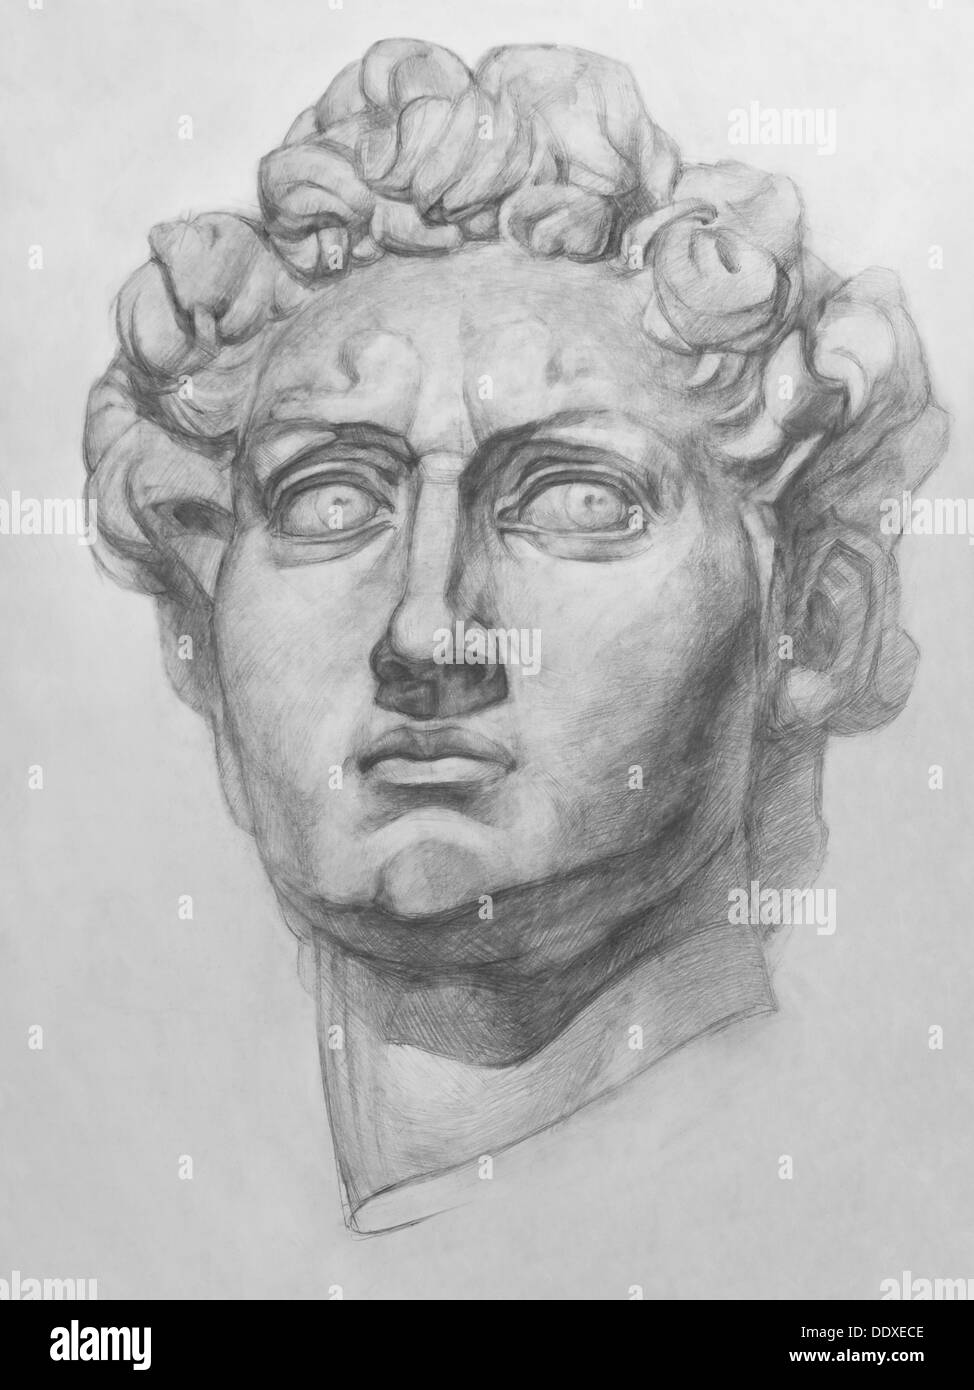 Plaster Replica of the David Statue by Michelangelo. It is a Pencil Drawing Stock Photo